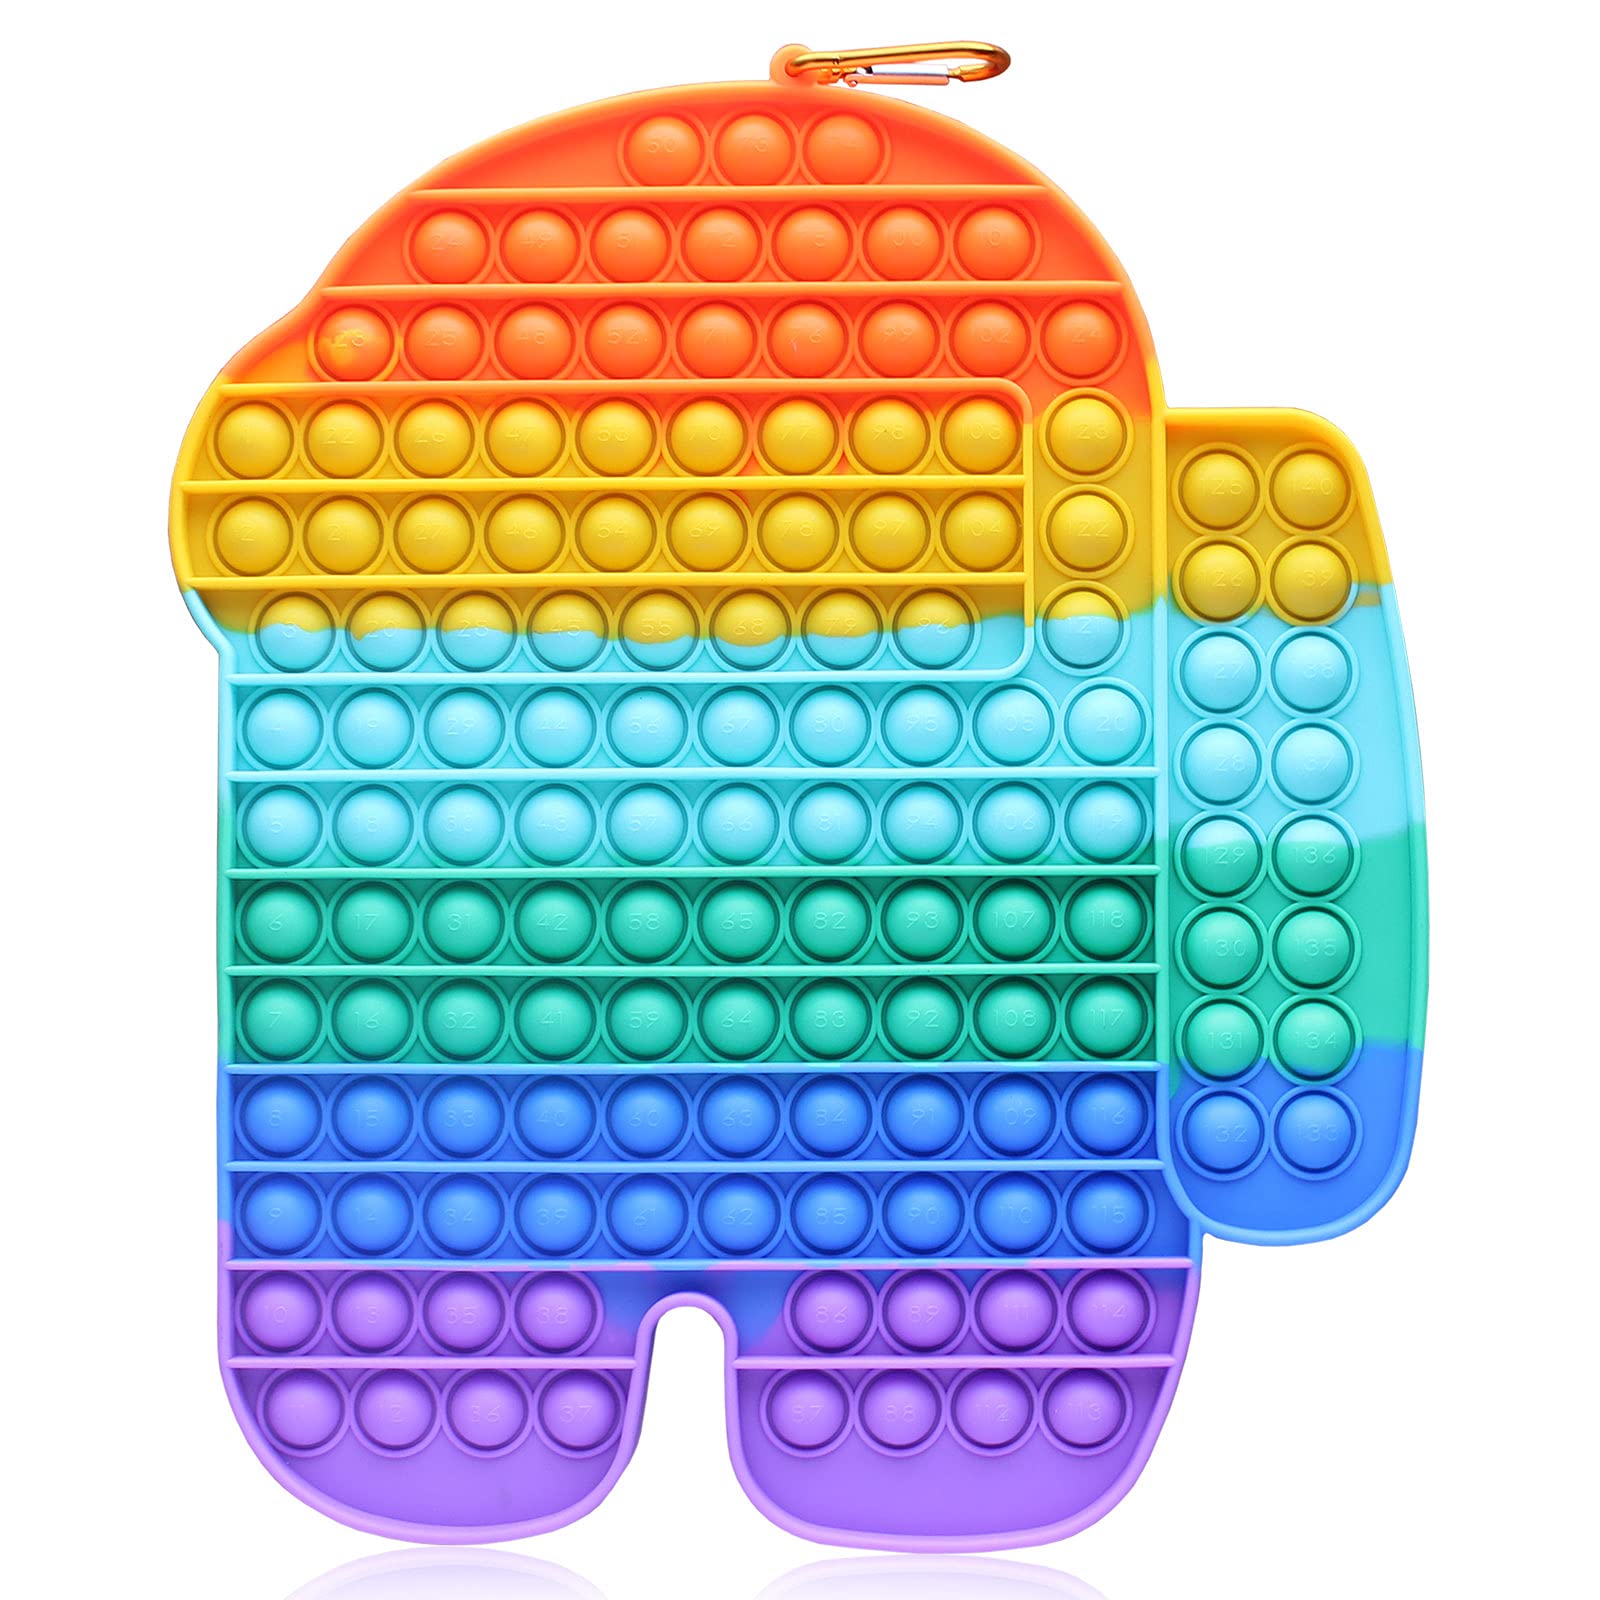 Big Size Pop Push Bubble Fidget Sensory Toy, Jumbo Rainbow Silicone Fidget Poppers, Anxiety Stress Toys Reliever Children Puzzle Game Toy Gift for Adults Kids (Rainbow)